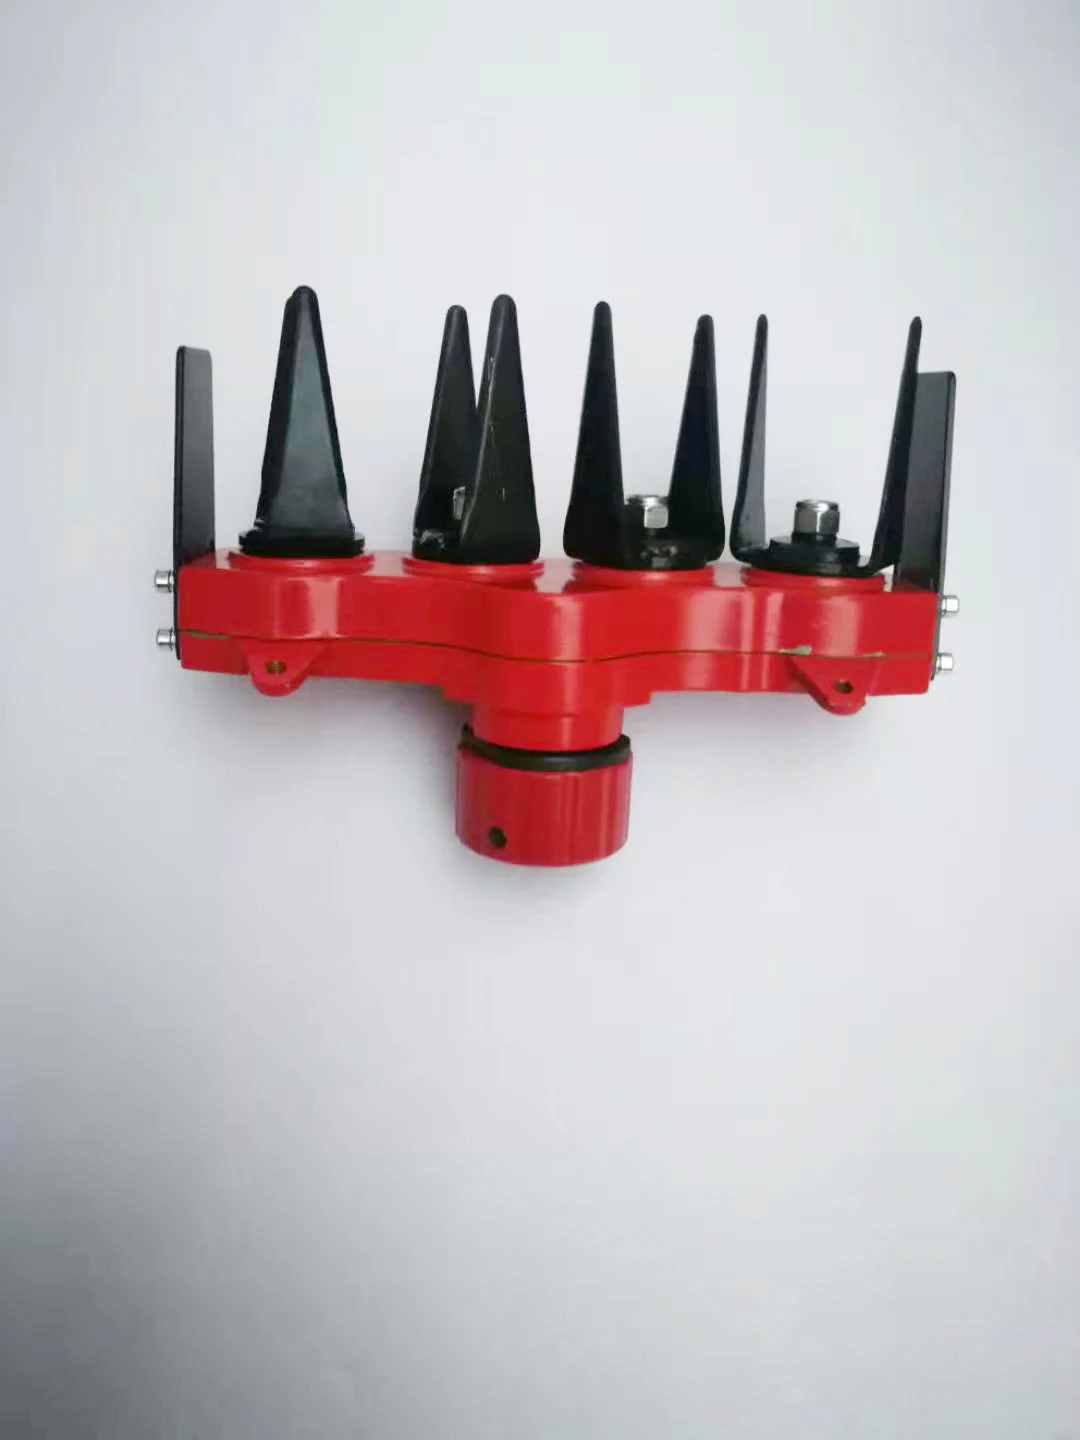 Unverisal Aluminum Alloy Case Brush Cutter Tiller Cultivator All Metal Soil Mixing Attachment Hole 4Tooth Blade enlarge